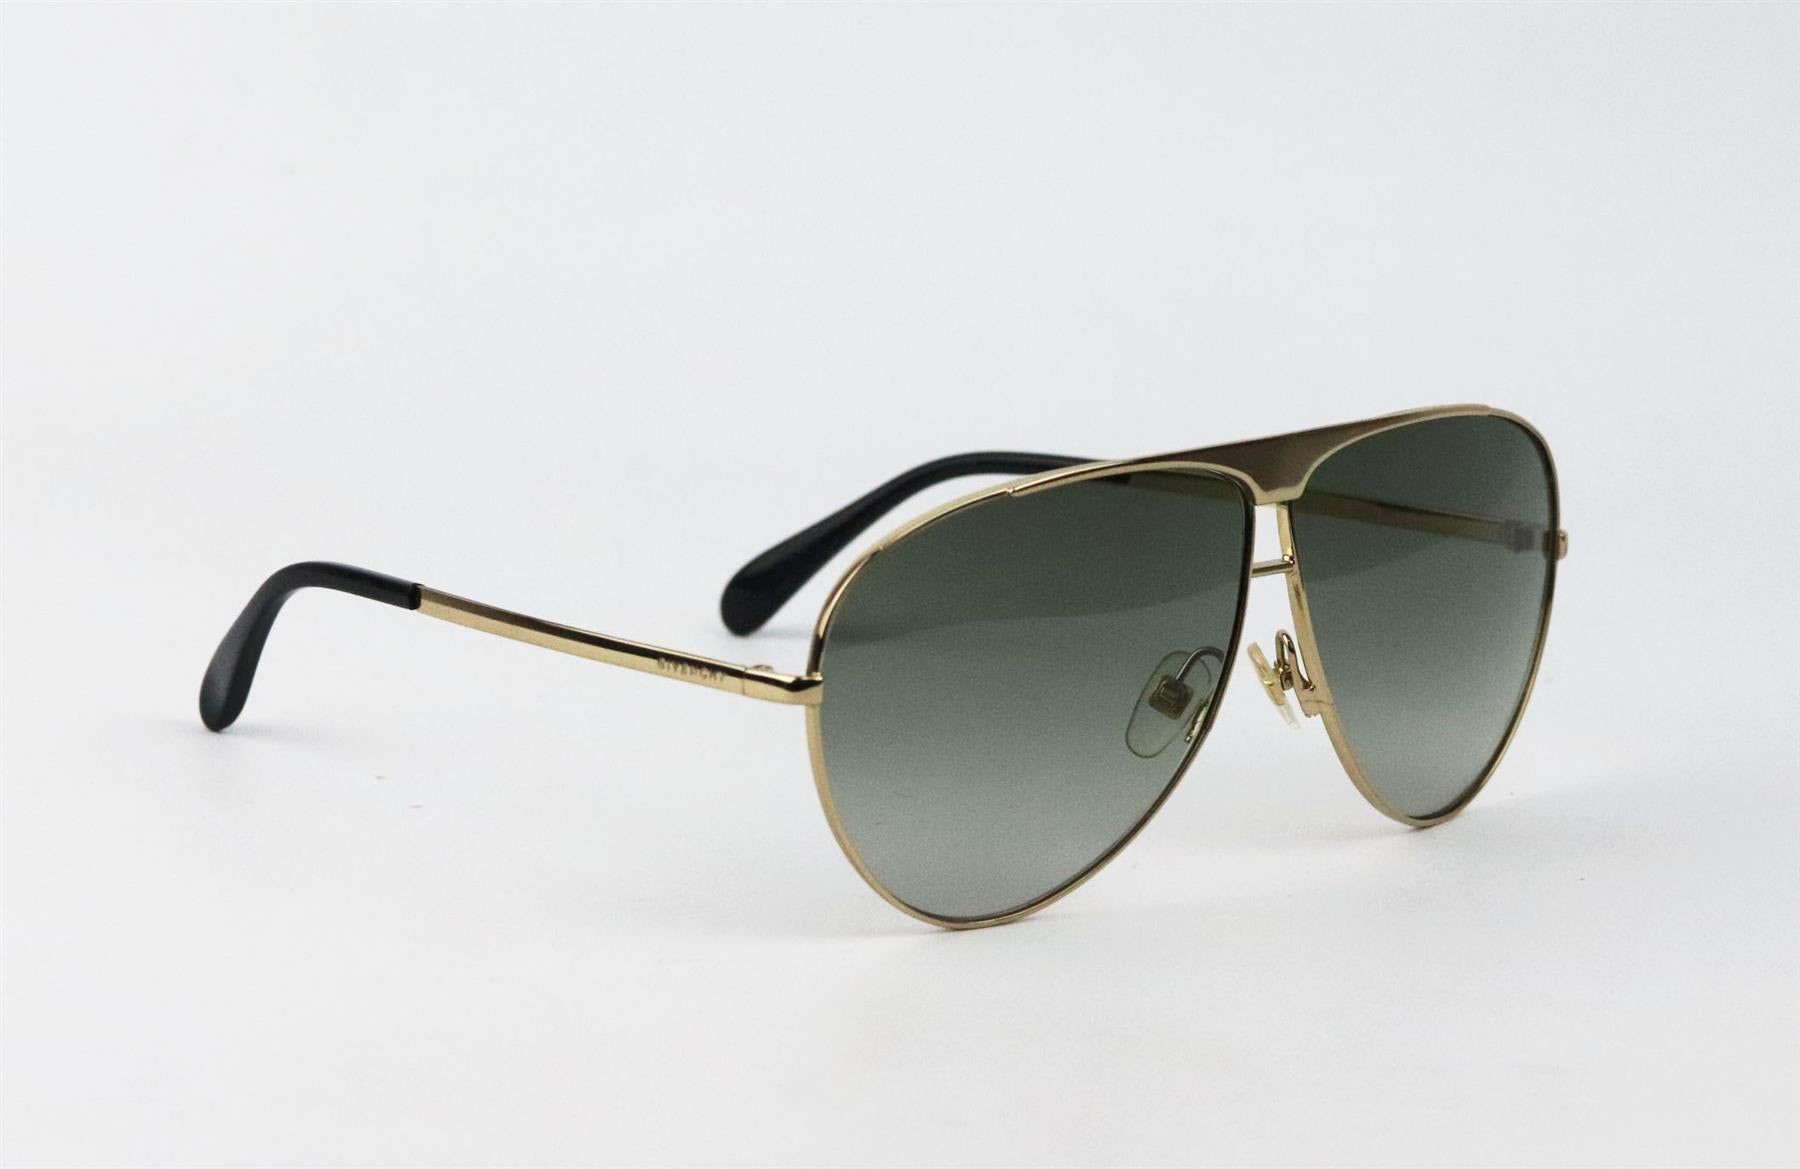 GIVENCHY GOLD TONE METAL SUNGLASSES